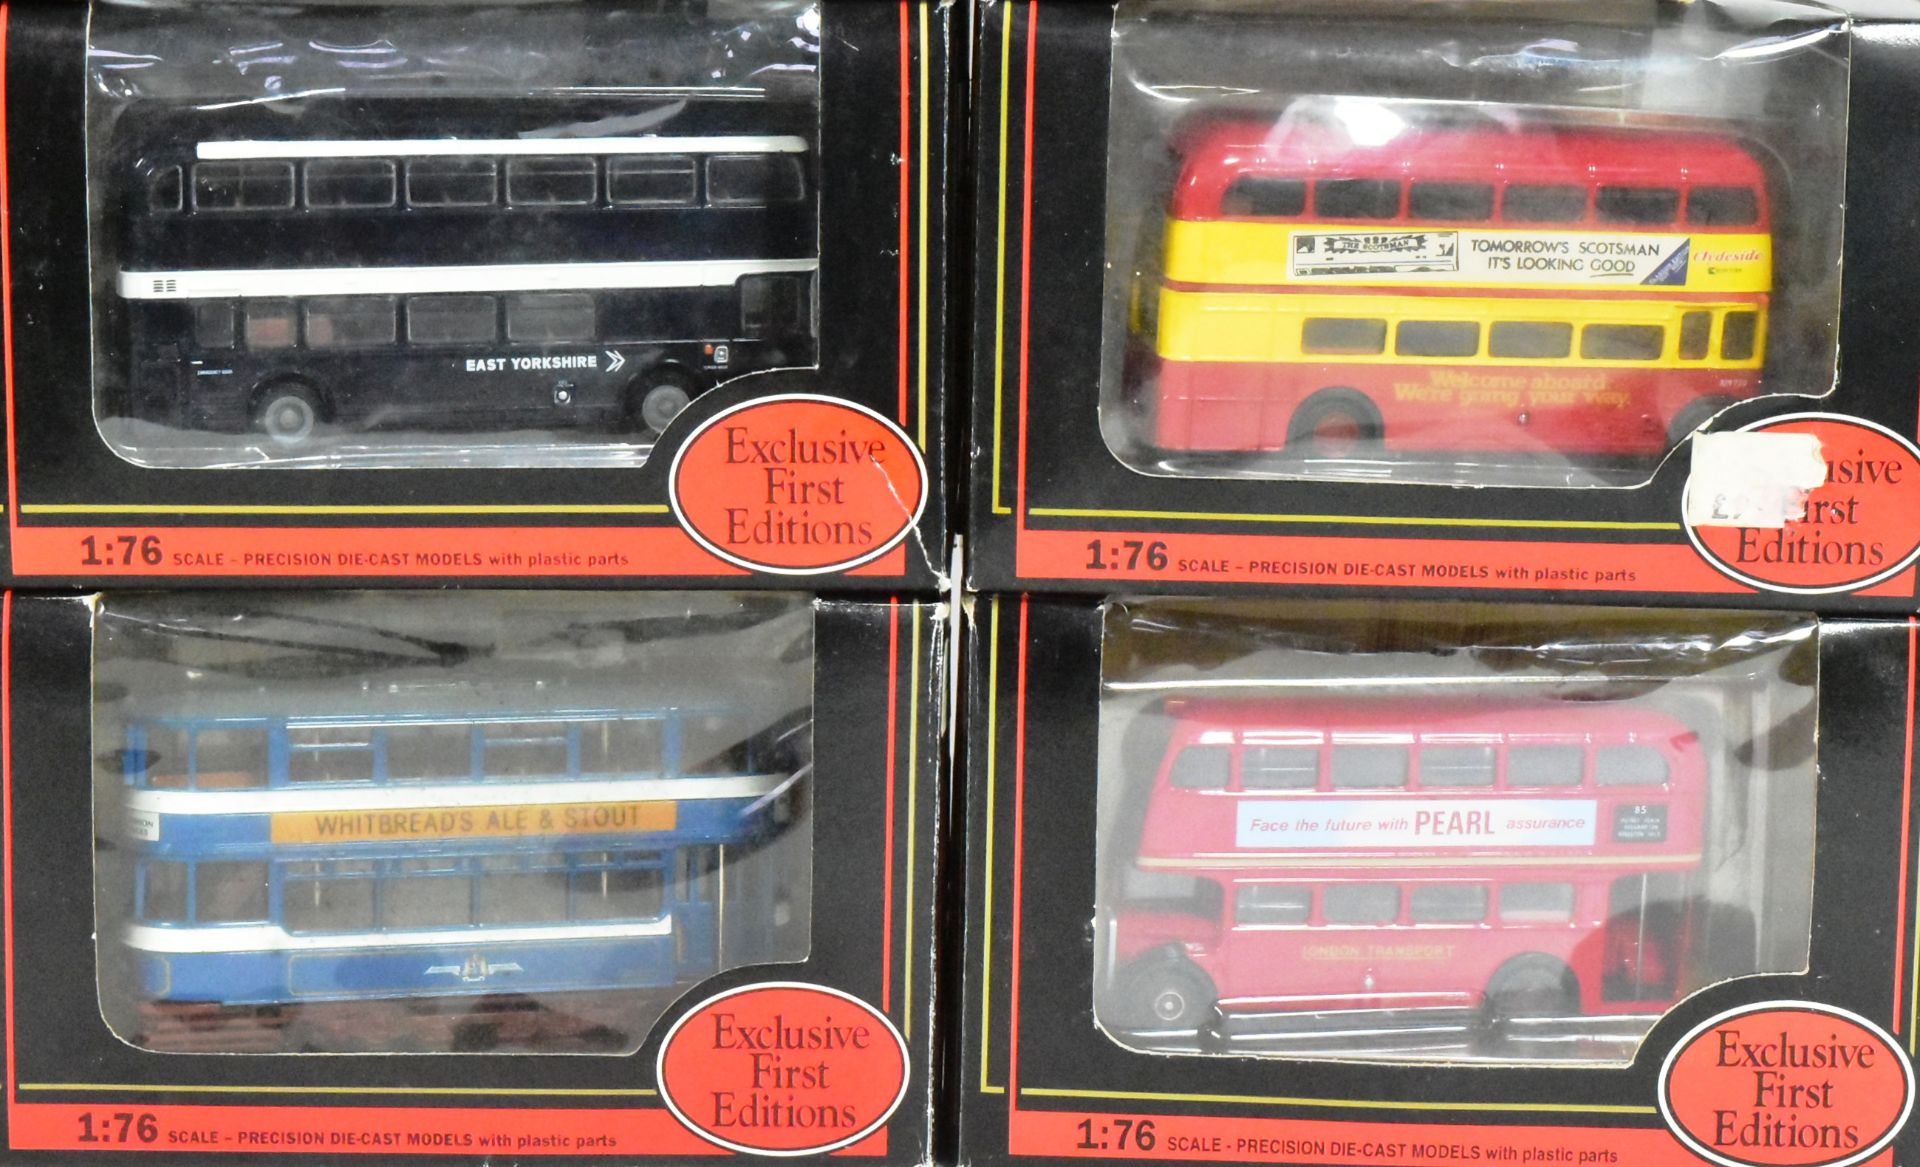 DIECAST - EFE EXCLUSIVE FIRST EDITIONS DIECAST MODEL BUSES - Image 3 of 5